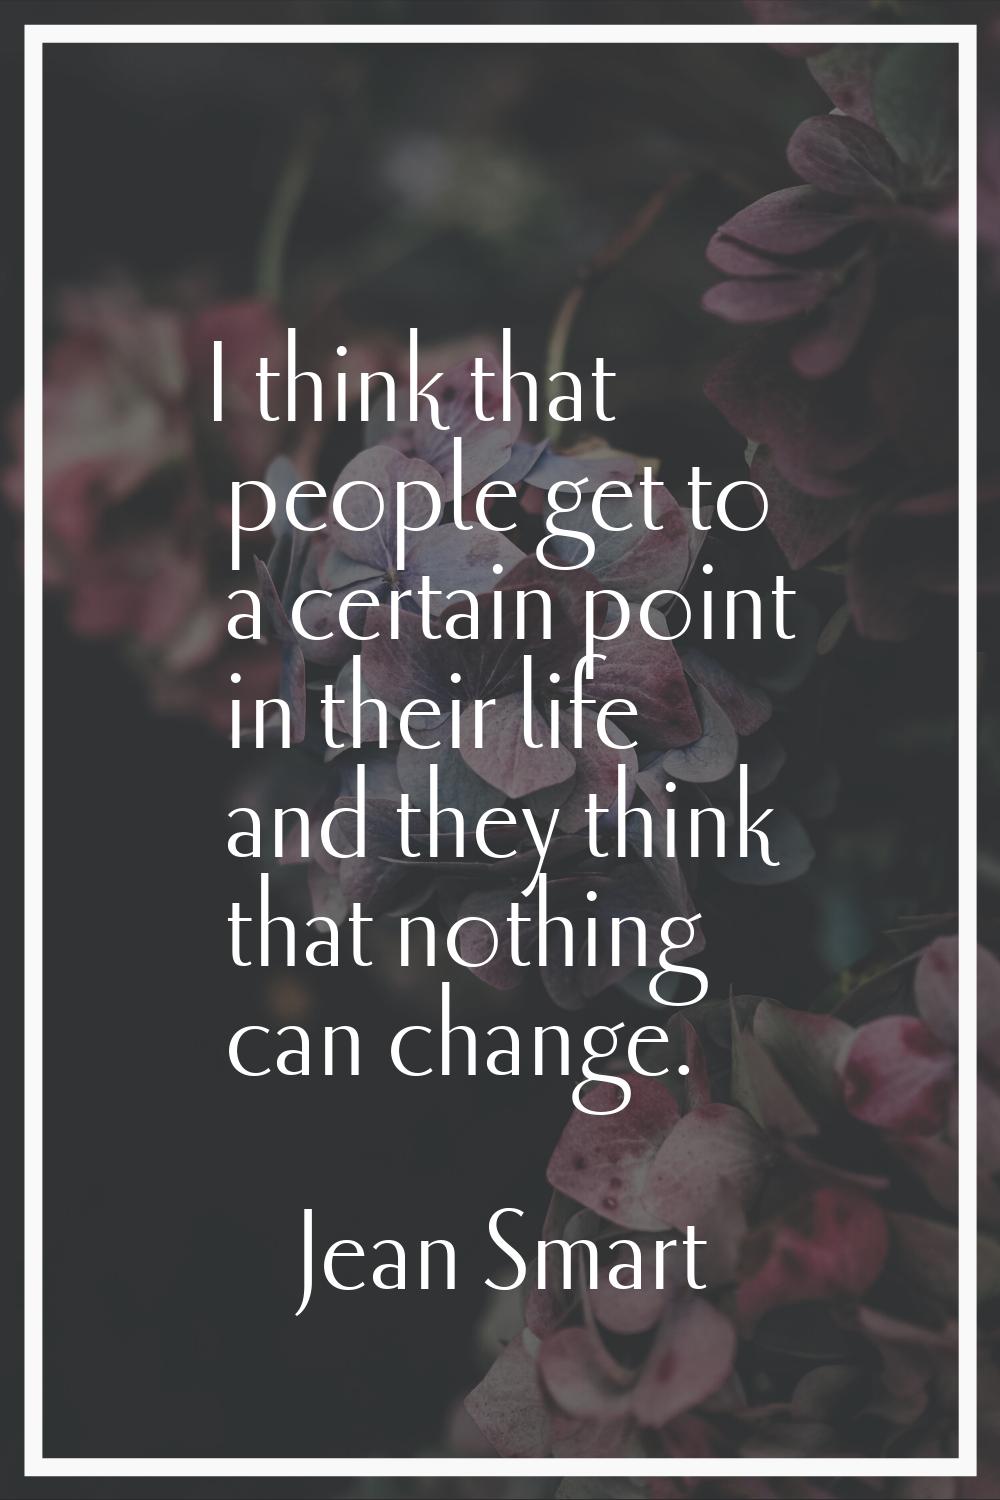 I think that people get to a certain point in their life and they think that nothing can change.